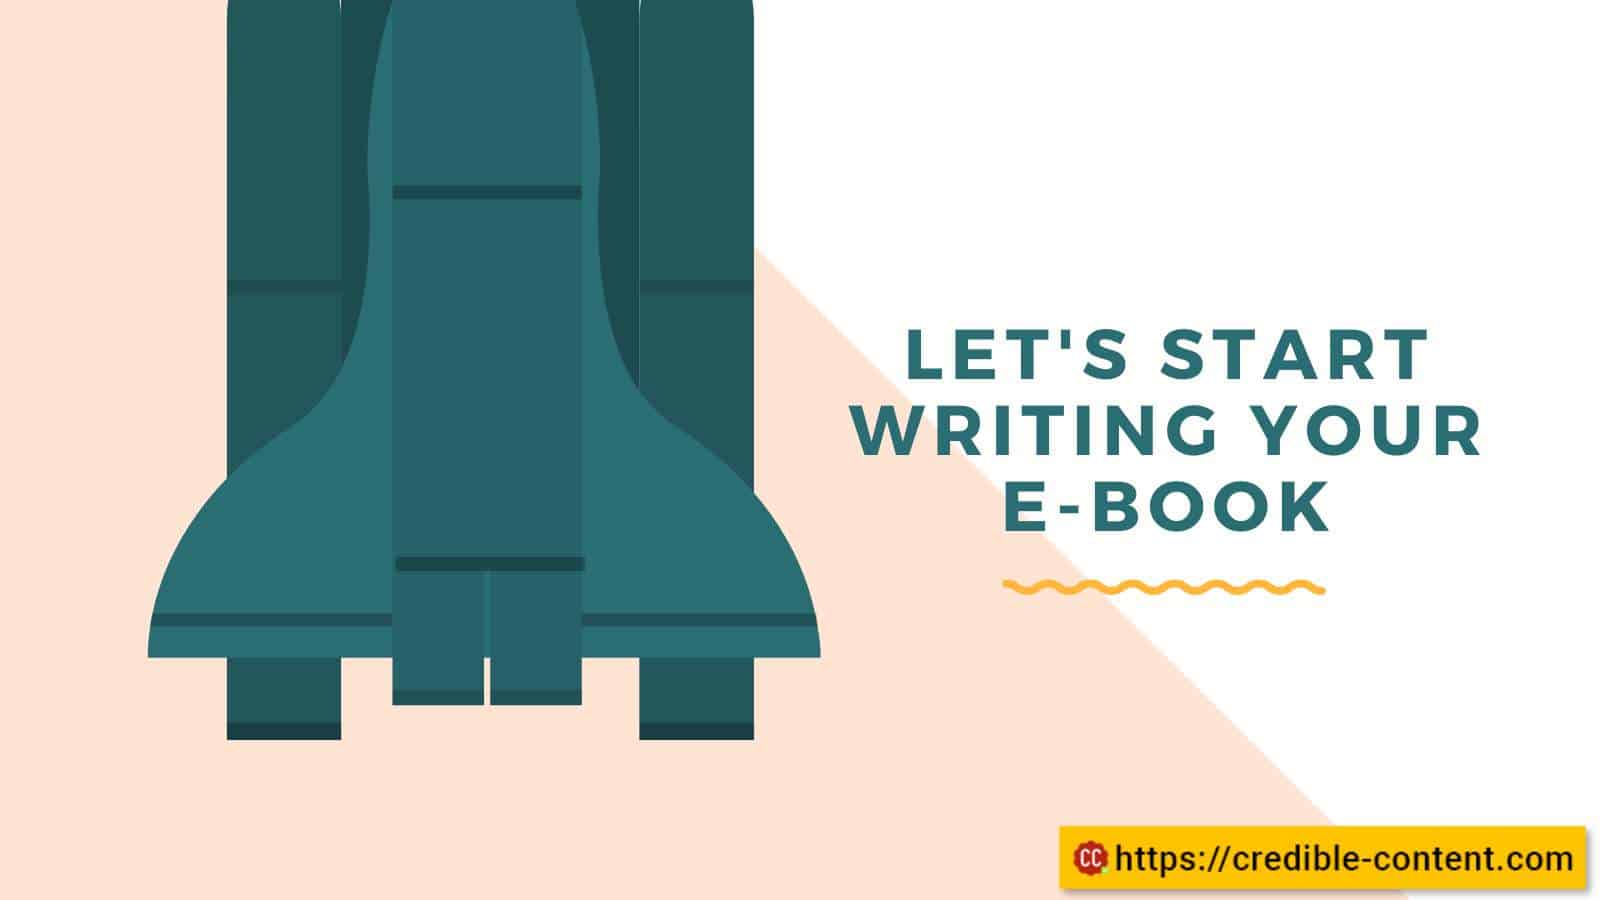 Let's start writing your e-book